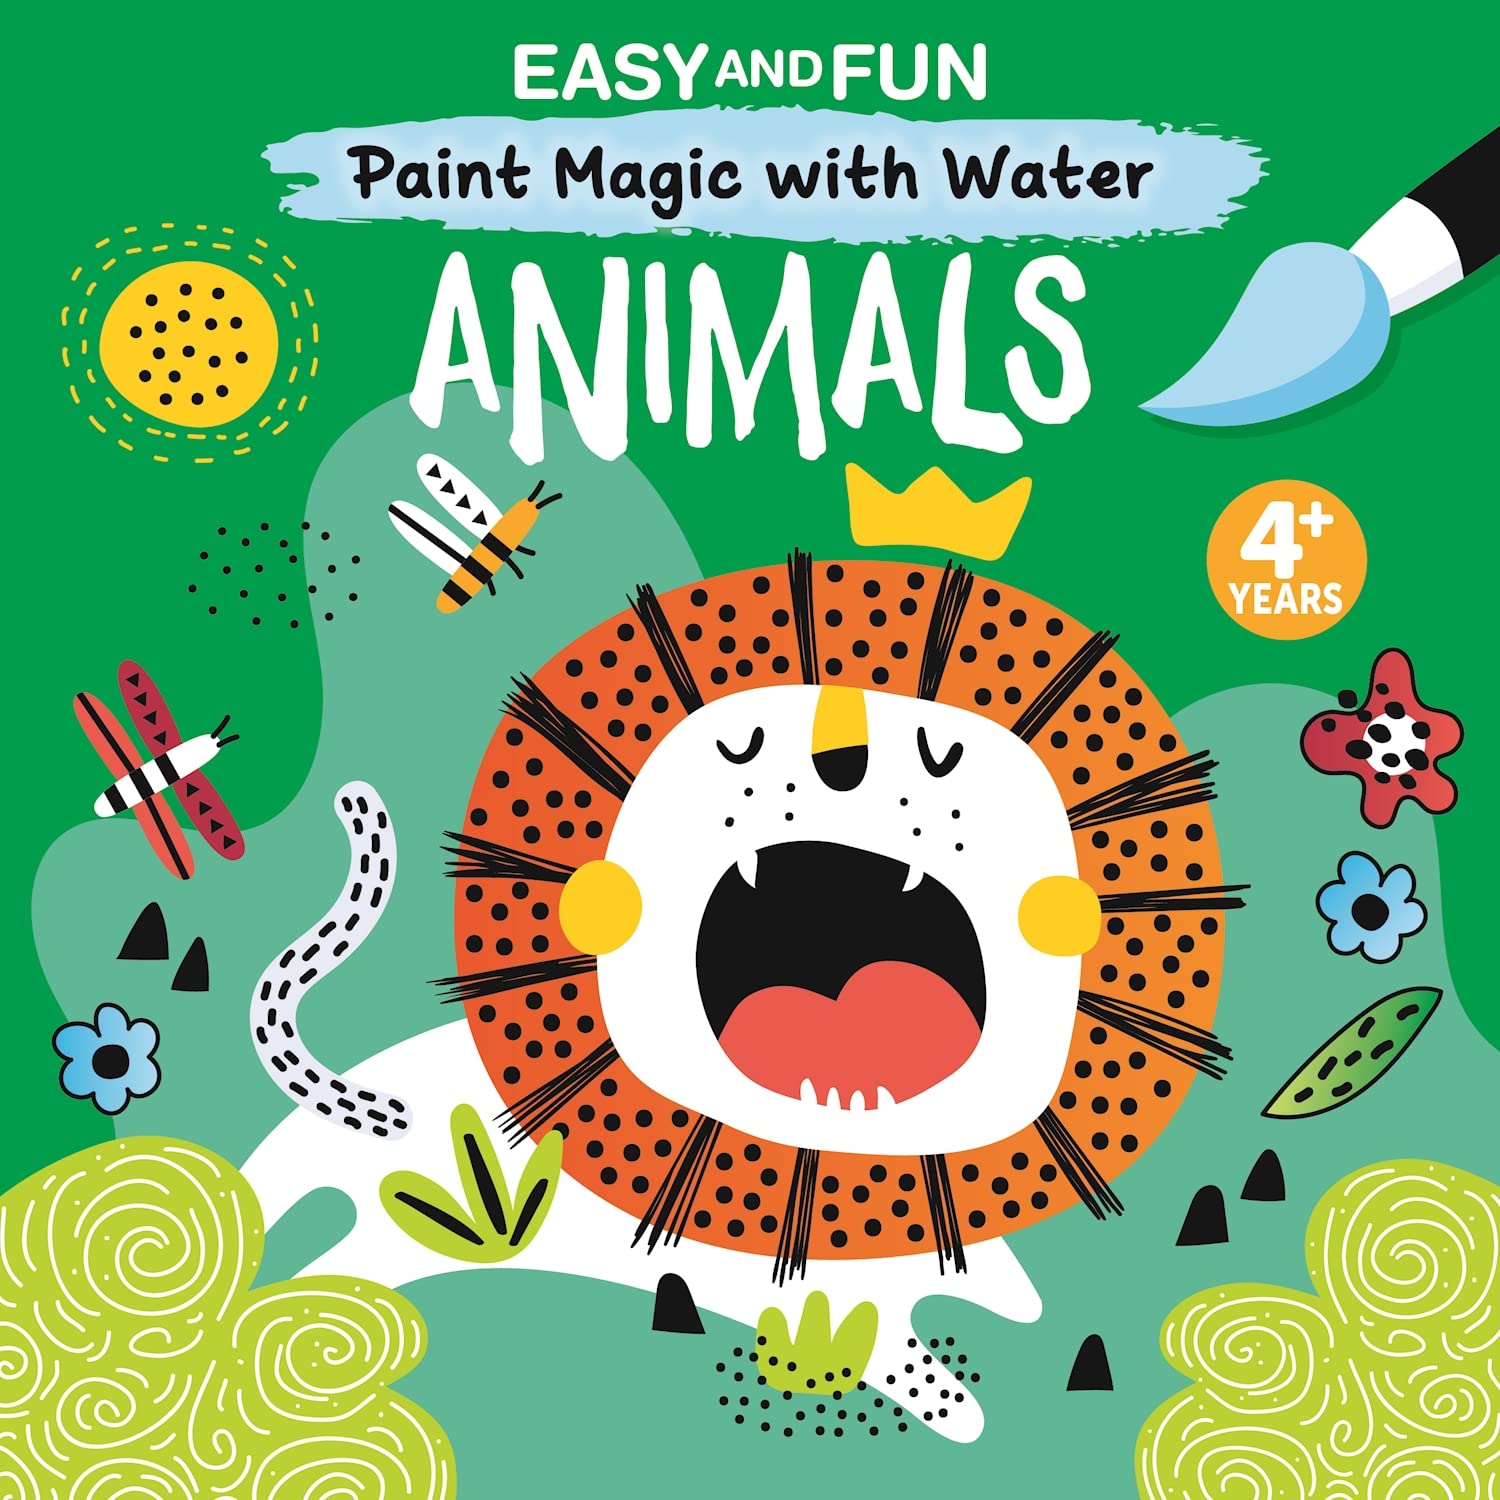 Children's Books :: All Children's Books :: Coloring Books :: Easy and Fun  Paint Magic with Water: Animals - Paintbrush Included - Mess-Free Painting  for Kids 3-6 to Create Kangaroos, Elephants, Alligators,